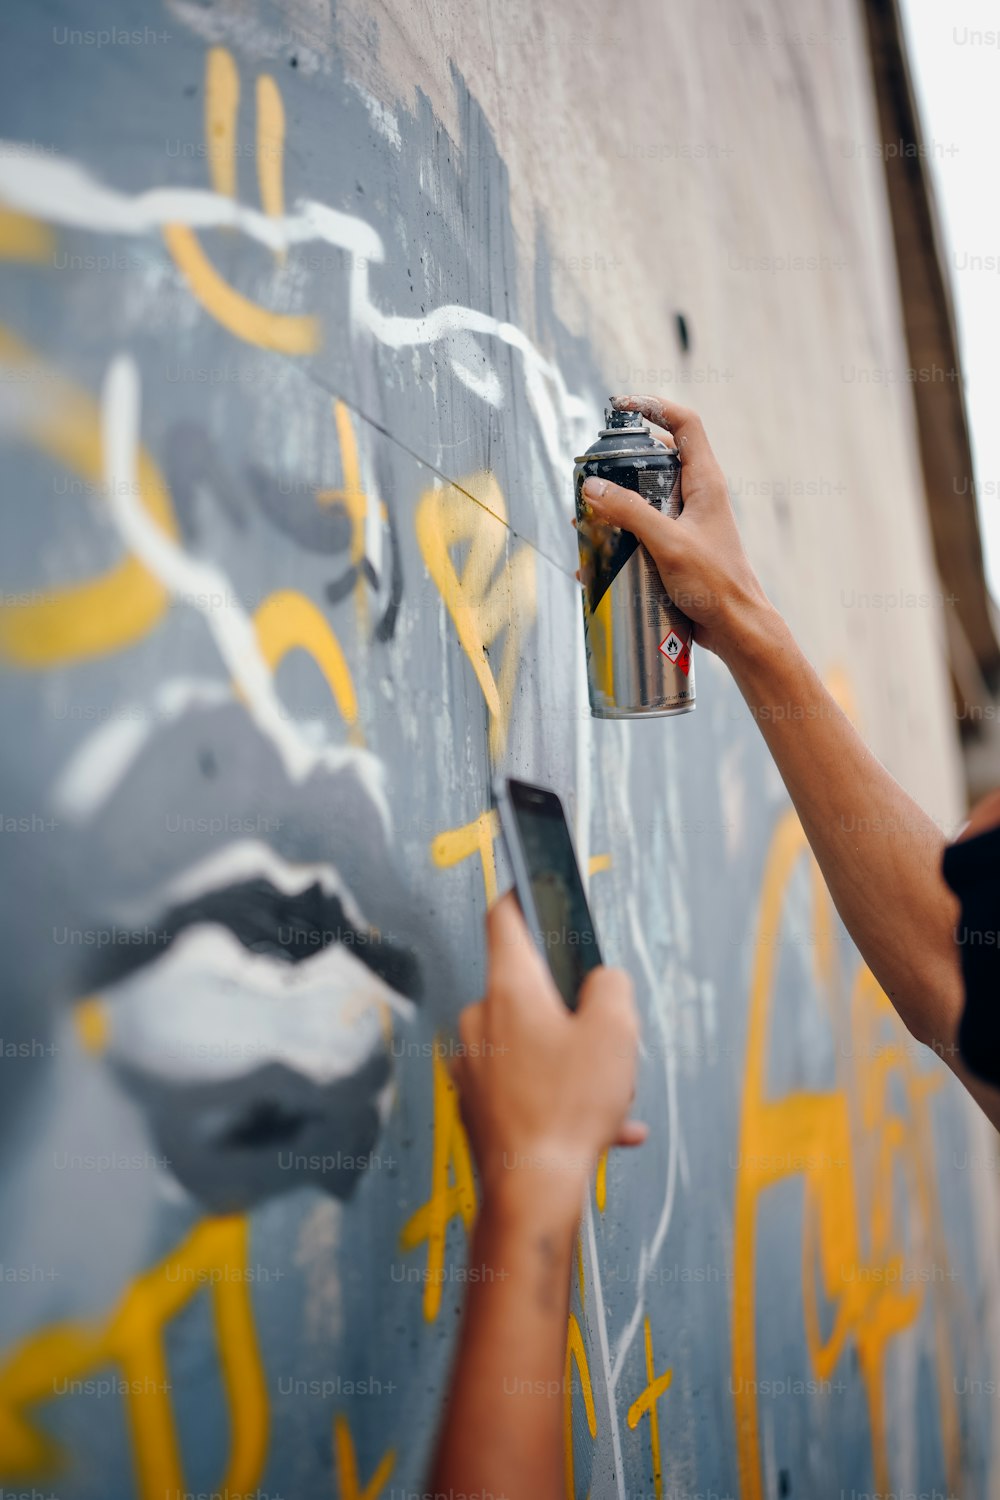 a person spray painting a wall with yellow and white paint